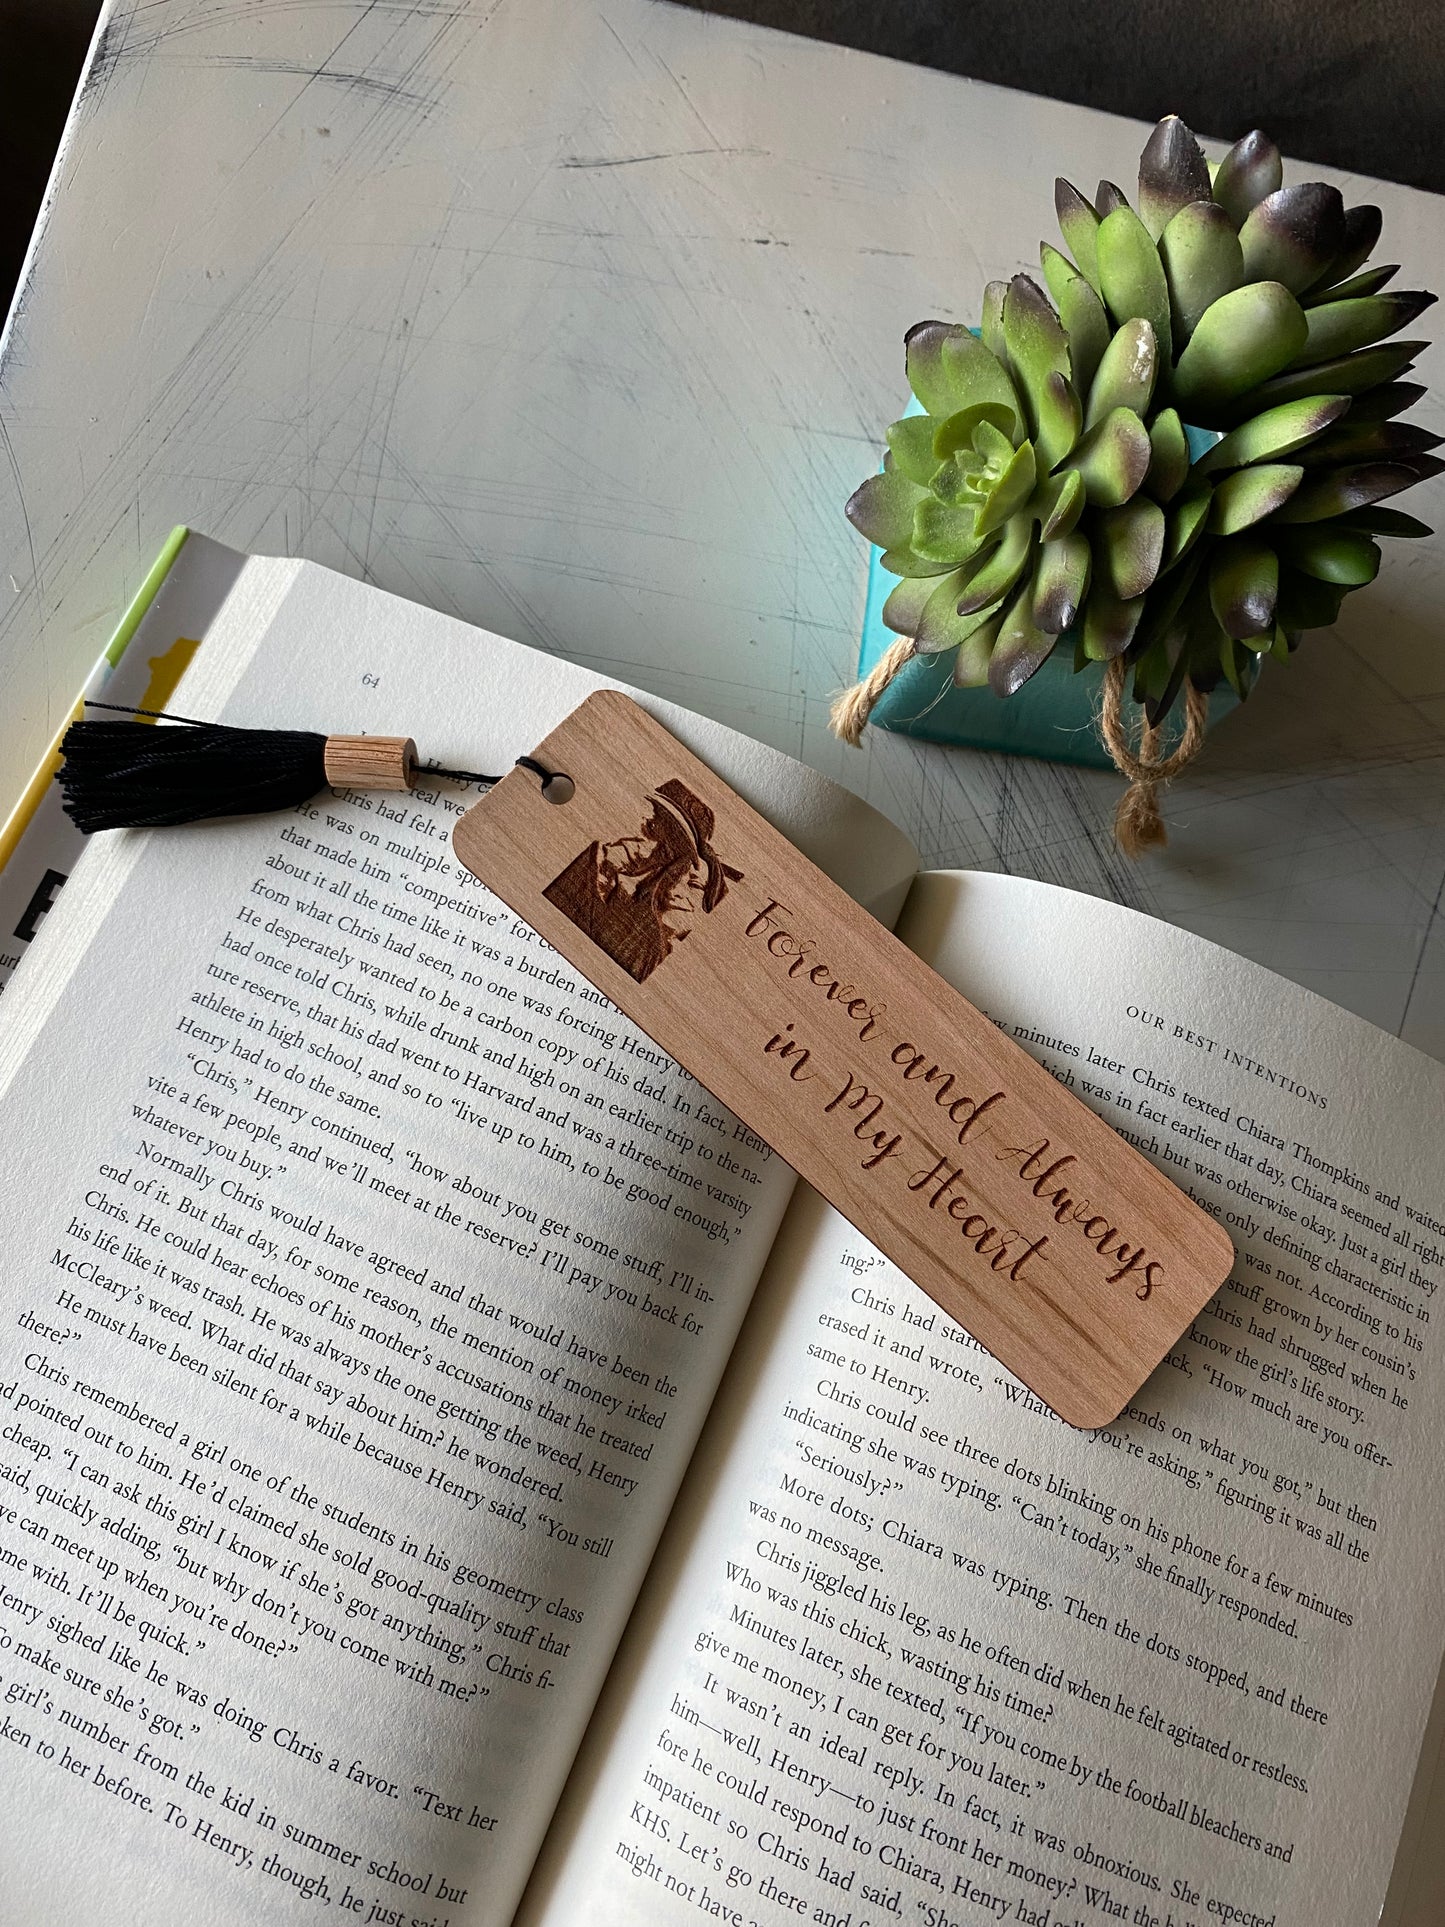 Forever and always in my heart - photo engraved bookmark memorial gift - Novotny Designs